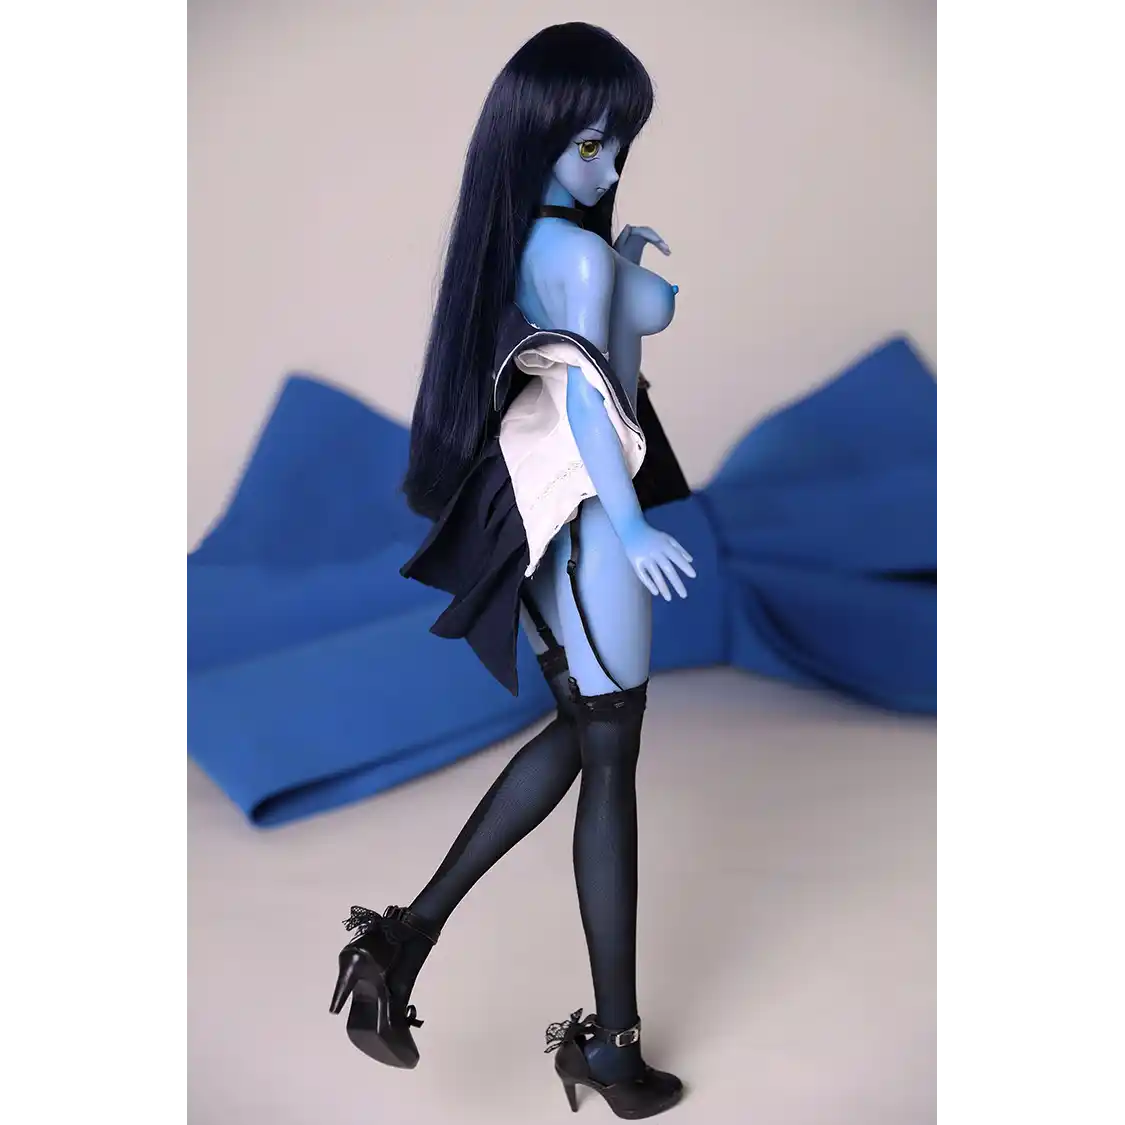 2ft 60cm anime style female mini silicone sex doll with medium breasts, blue skin and a fit athletic body in a sailor moon outfit.